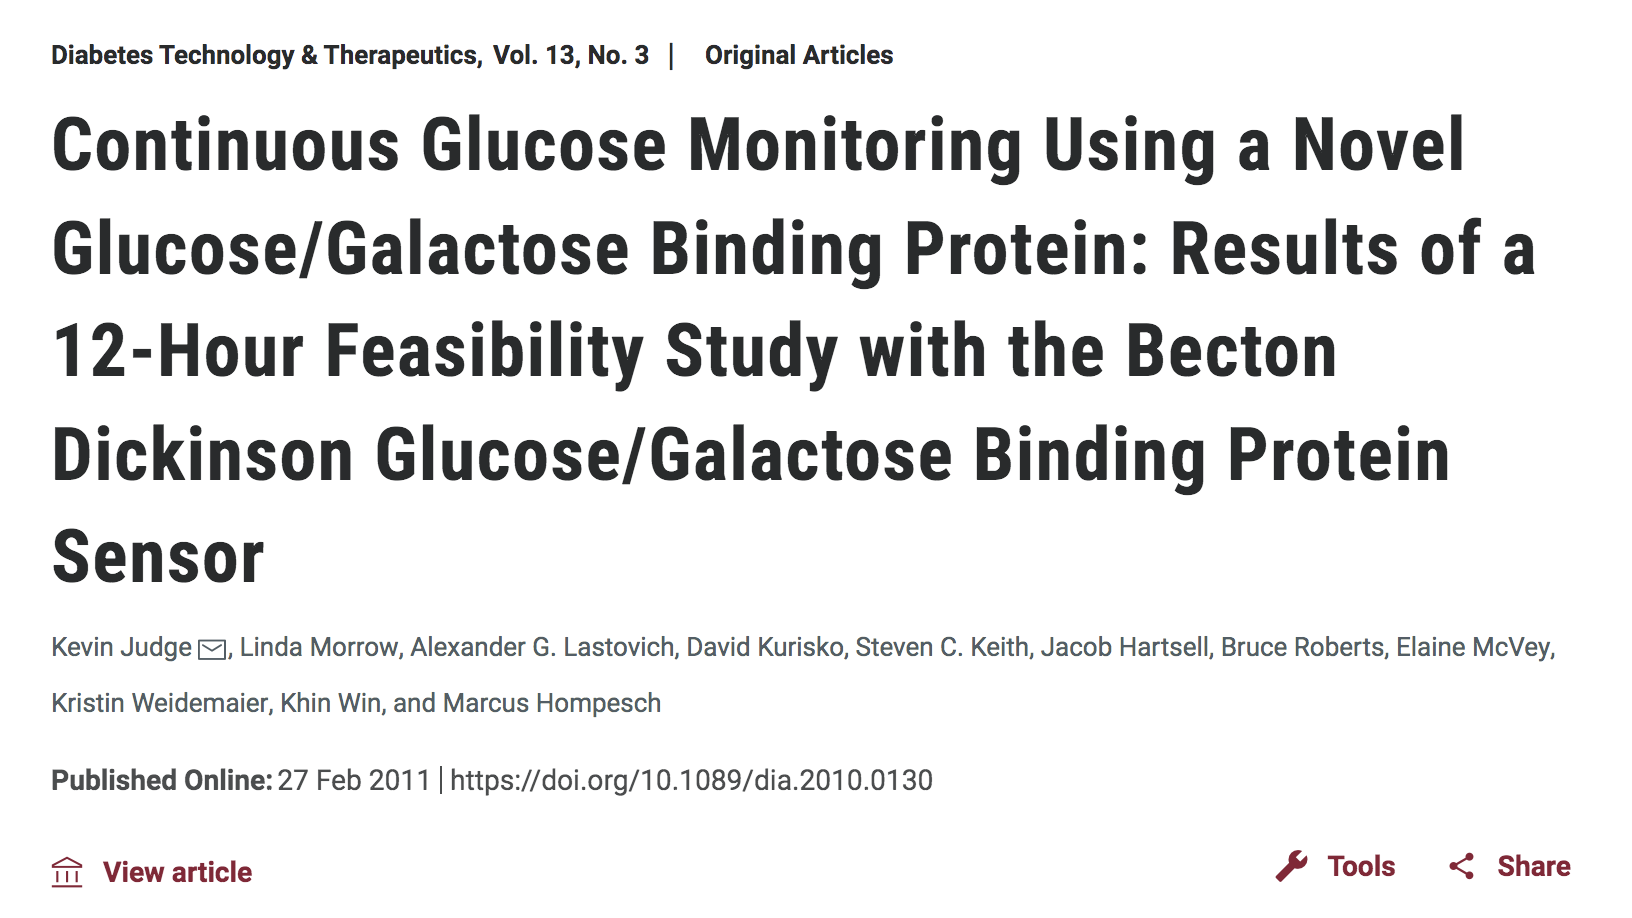 Continuous glucose monitoring using a novel glucose/galactose binding protein: results of a 12-hour feasibility study with the becton dickinson glucose/galactose binding protein sensor thumbnail